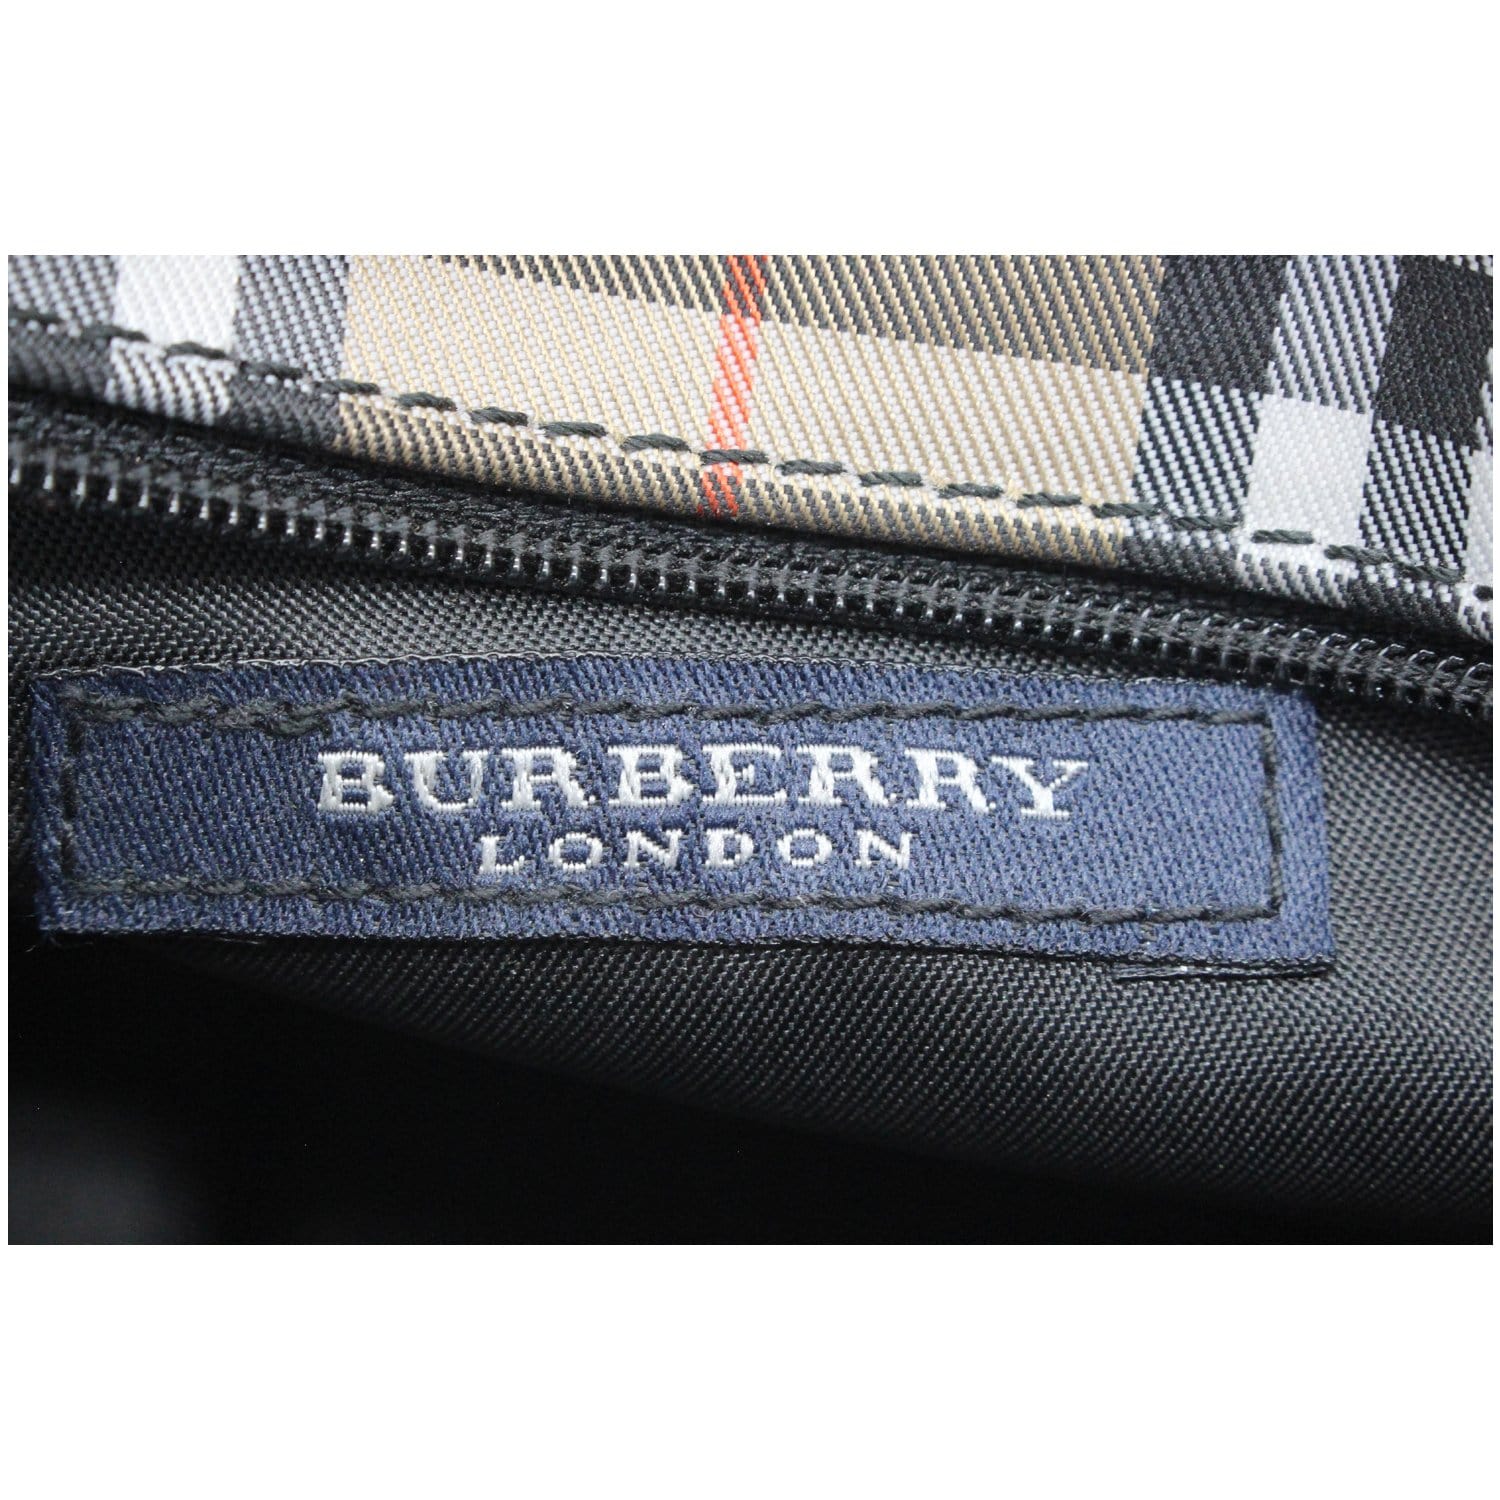 How do you tell if a Burberry bag is real or fake?